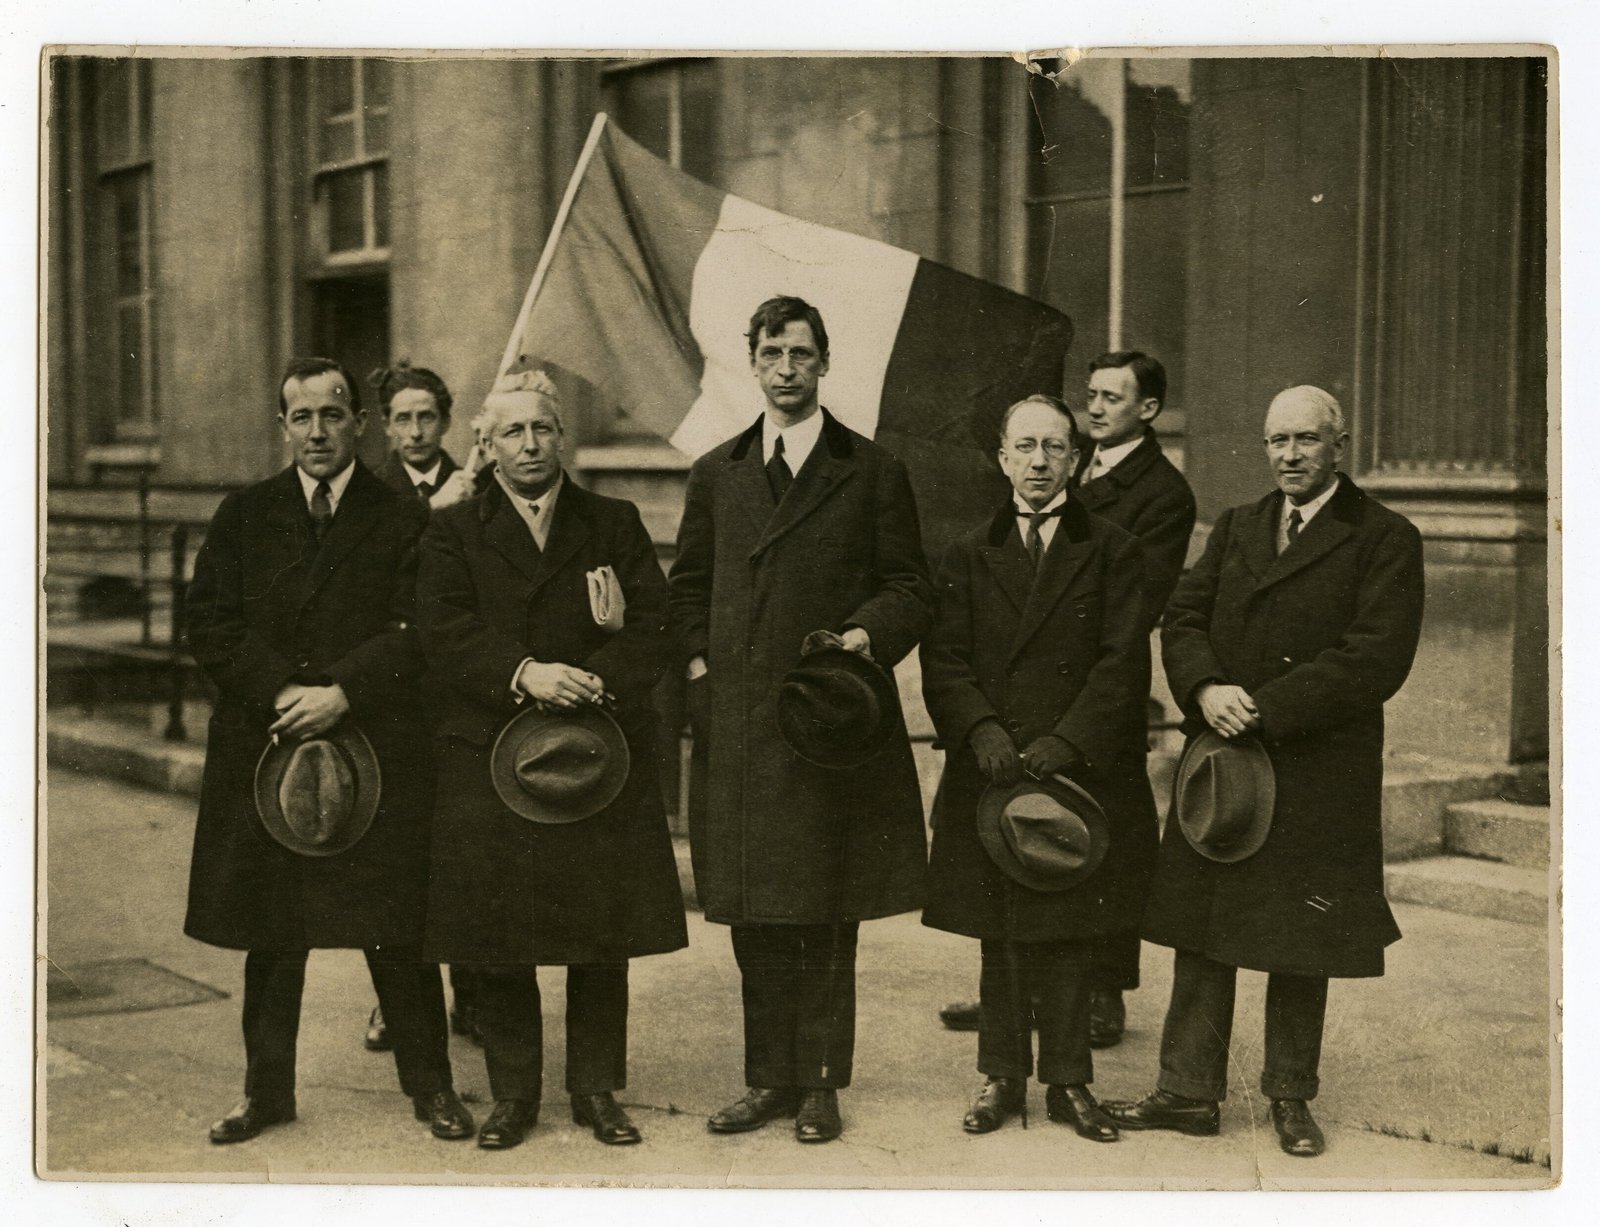 Image - The anti-treaty diplomats of the Dáil Eireann Foreign Service followed Éamon de Valera into opposition, including Harry Boland, Art O'Brien and Sean T O'Kelly (P0048a 0303 001. Reproduced by kind permission of UCD Archives)